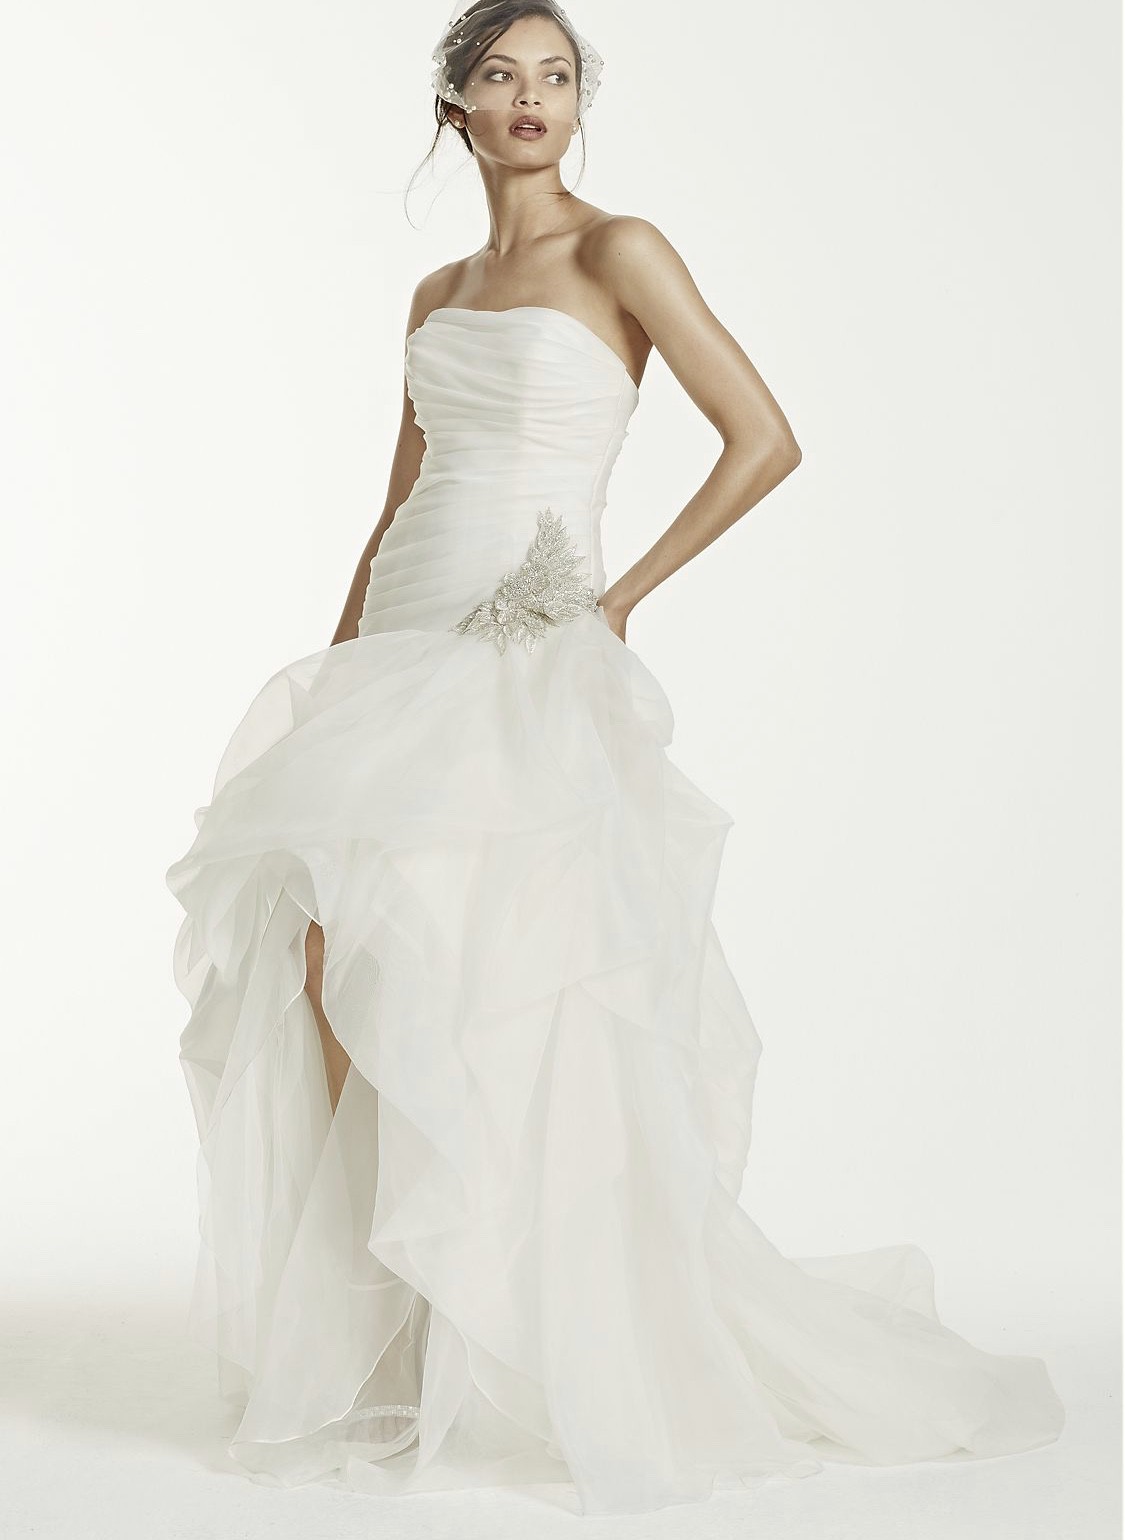 New Fit & Flare wedding dress for US$500. 